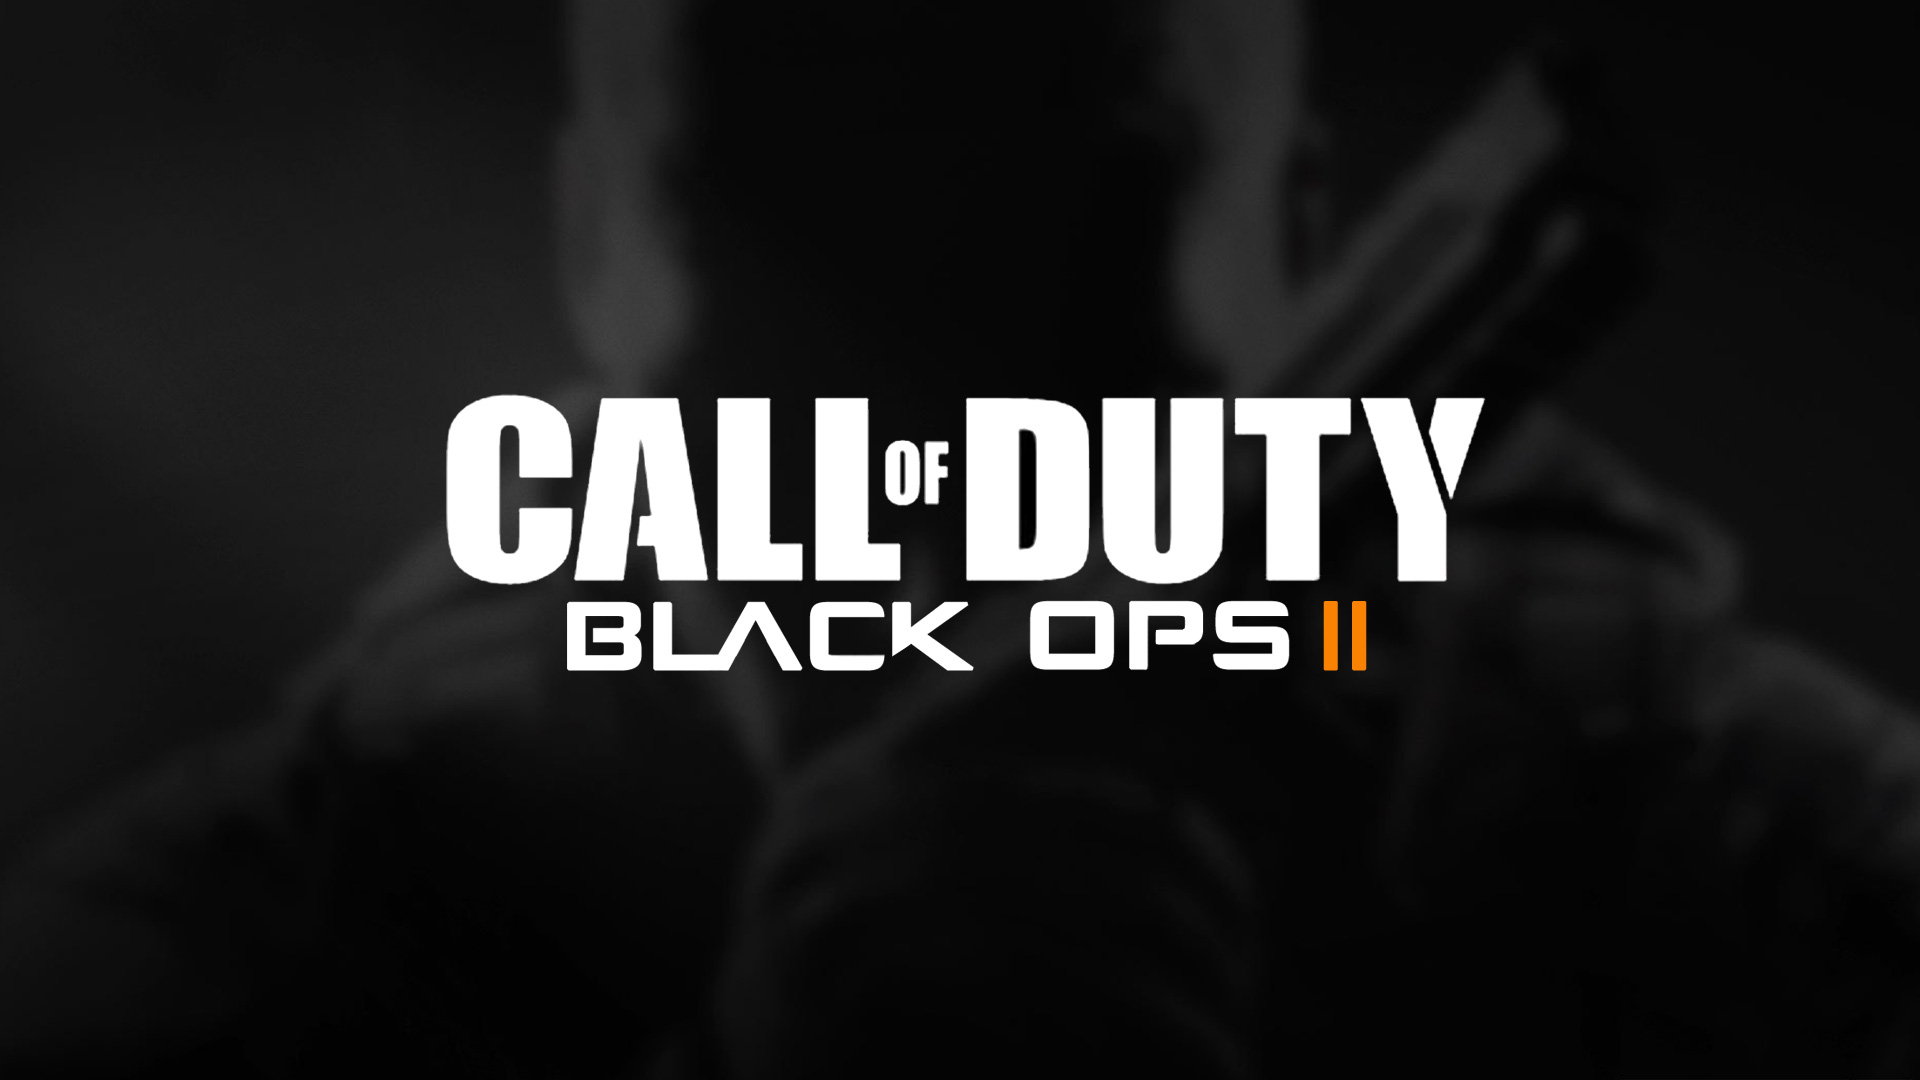 Free download Black Ops 2 Wallpapers in HD Page 4 [1920x1080] for your